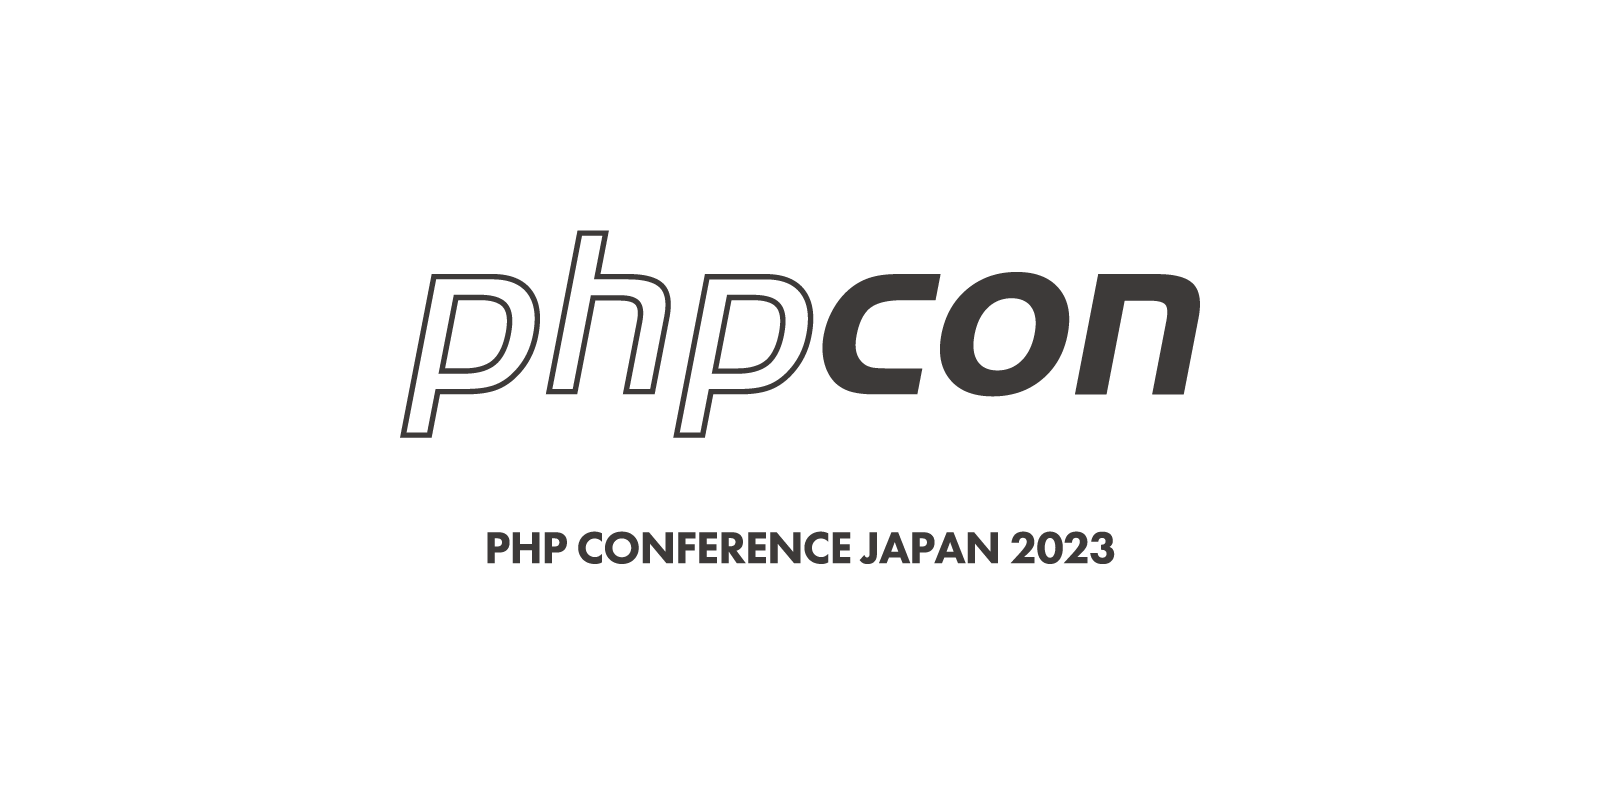 PHP Conference Japan 2023 banner